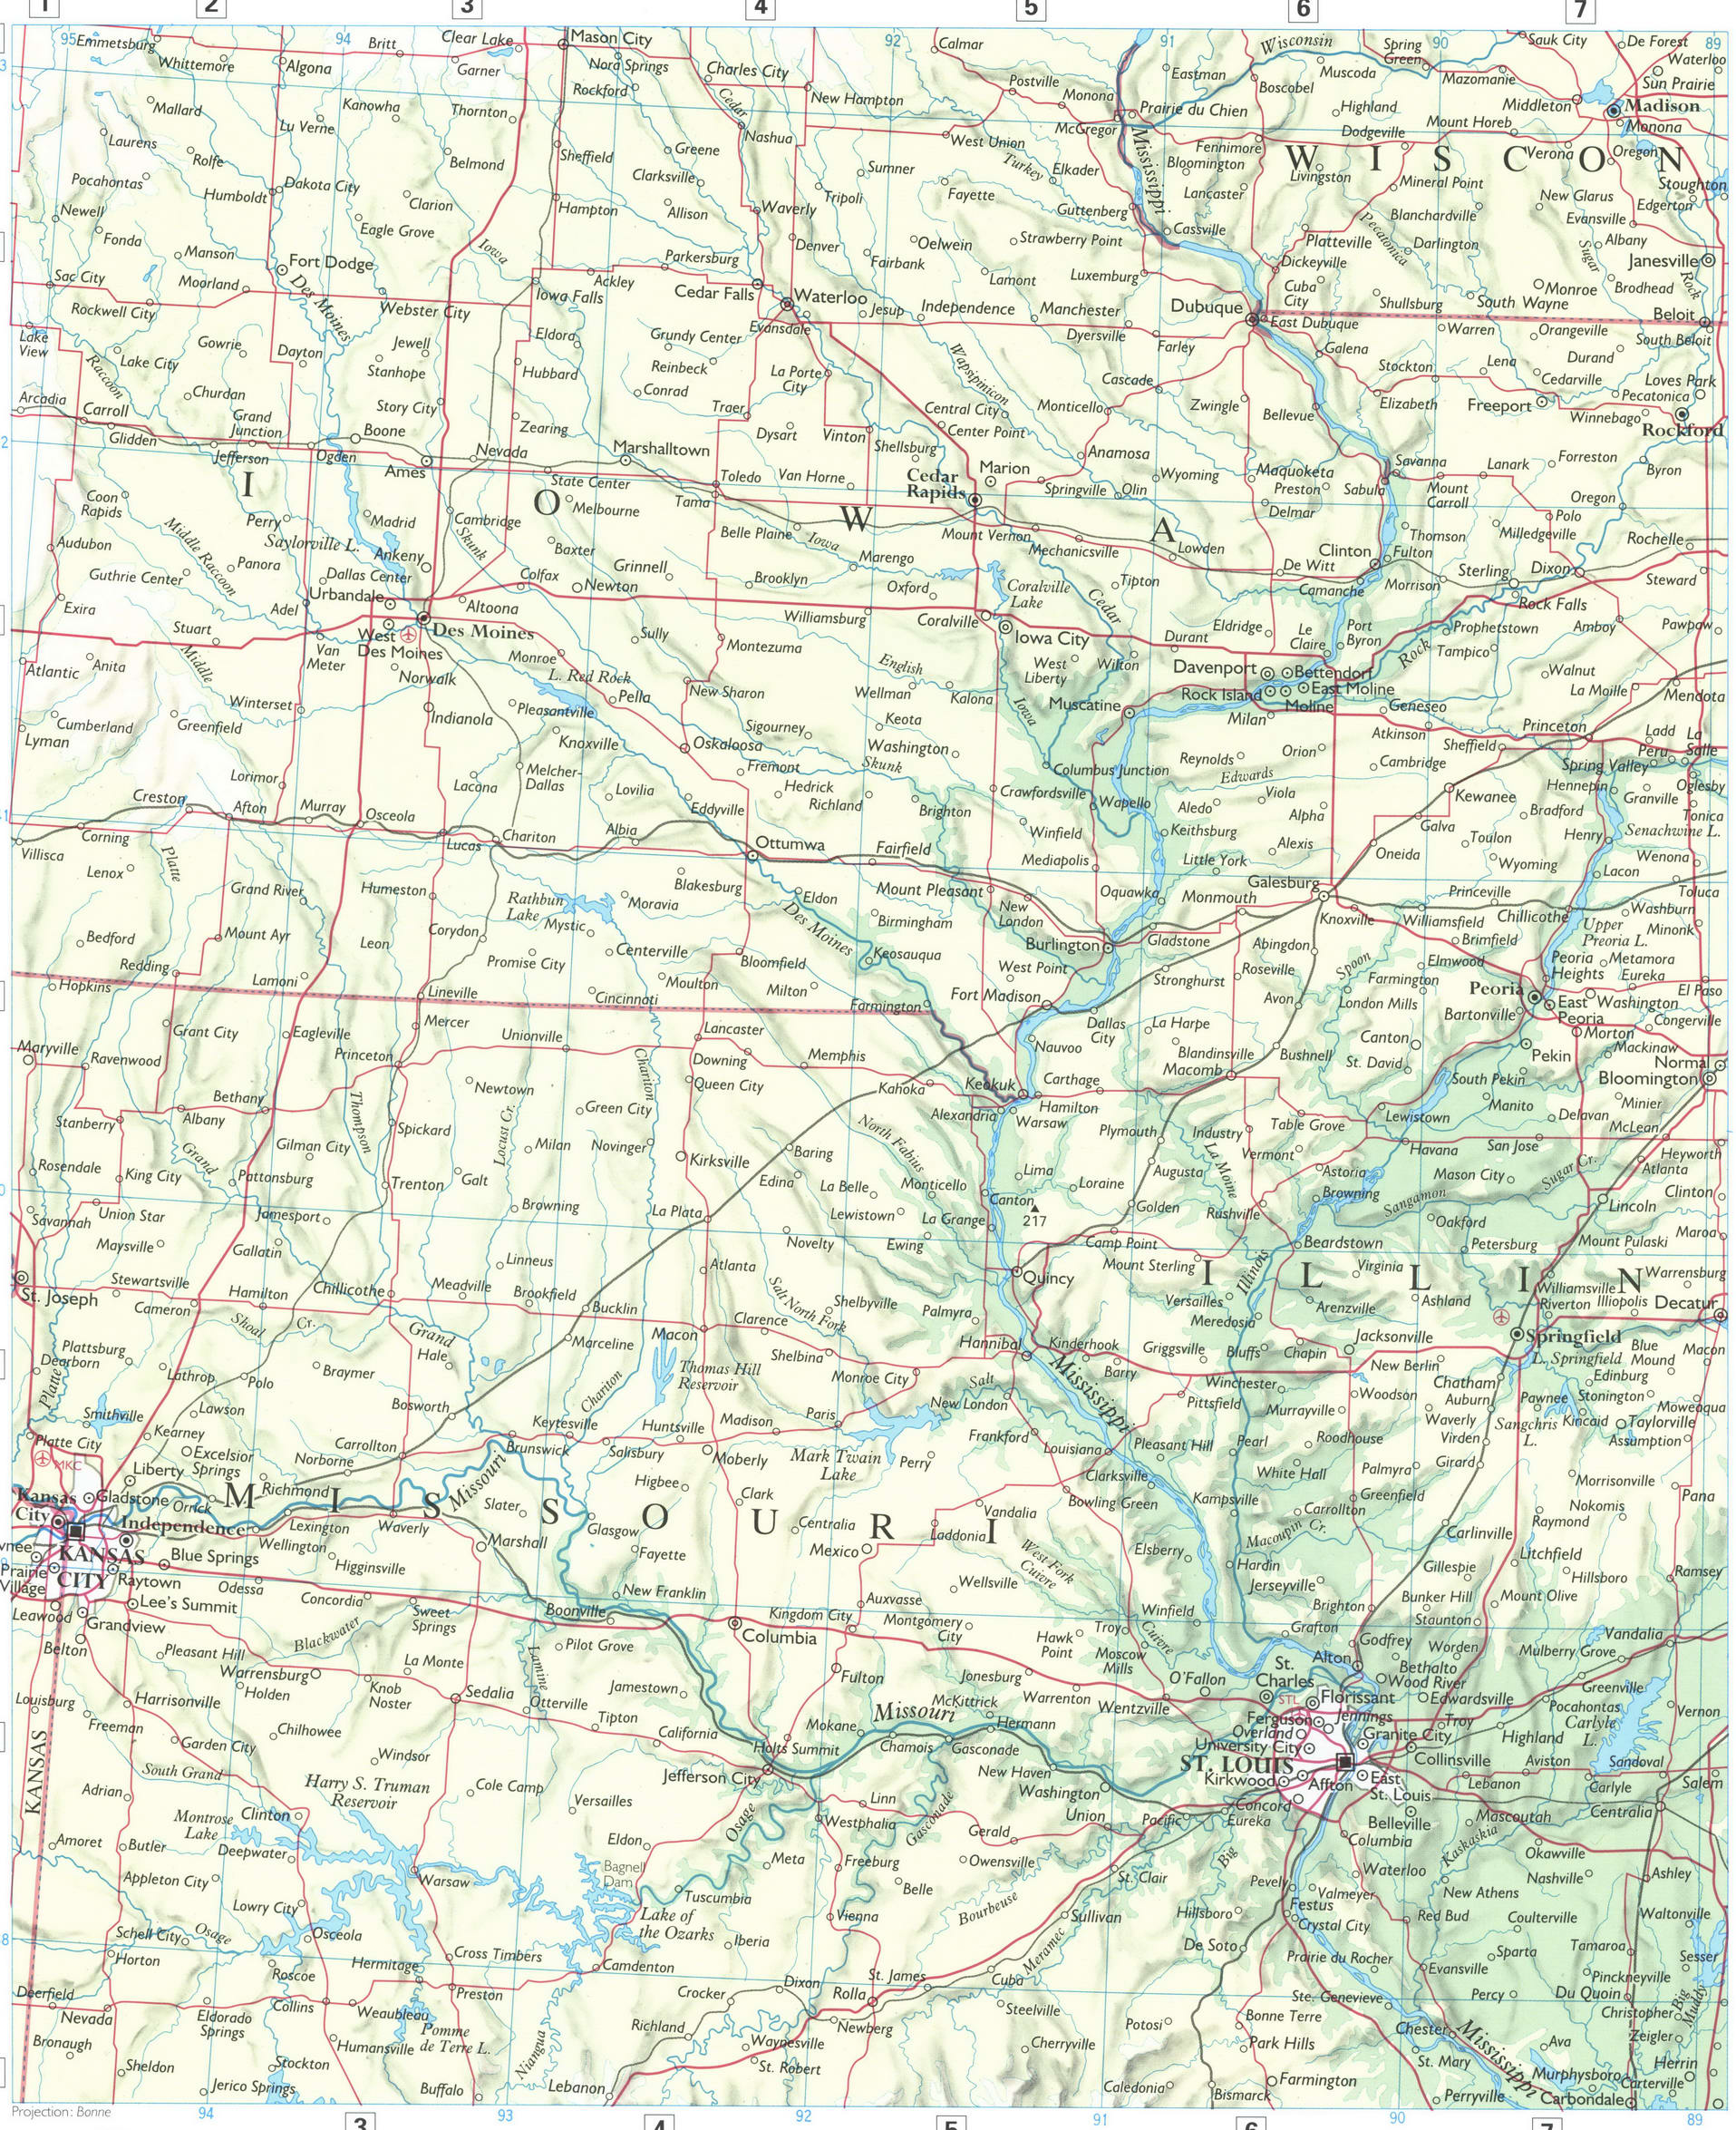 Midwest USA map